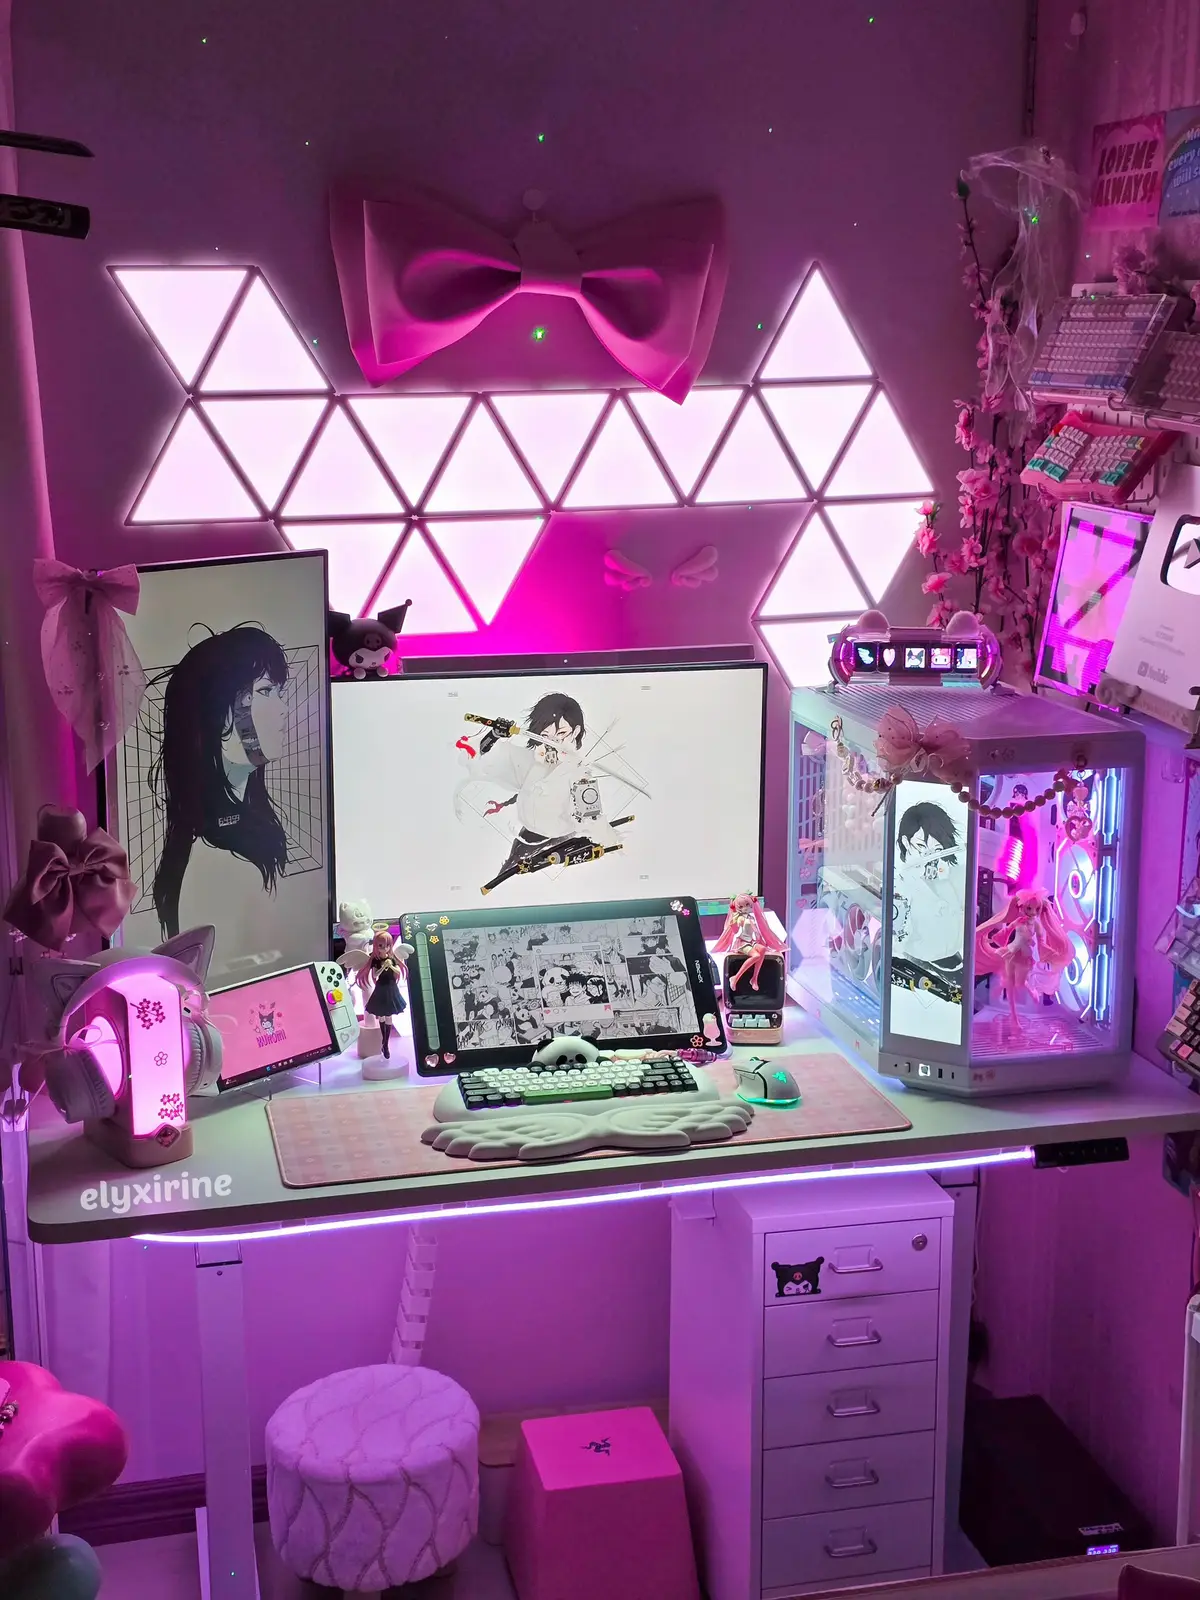 pink and white❕happy weekend gamers🕺🏻 • PC Case: HYTE Y70 Touch @Hyte *gfted • Keyboard: YUNZII C68 Panda @Official YUNZII Keyboard Store *gfted • Artist 16 Pro pen display @XPPen Official @Le Petit Prince *gfted  • Headphone: YOWU Cat Ear 4GS @yowu chan *gfted #pcsetup #pcbuild #desksetup #setupinspiration #pinksetup